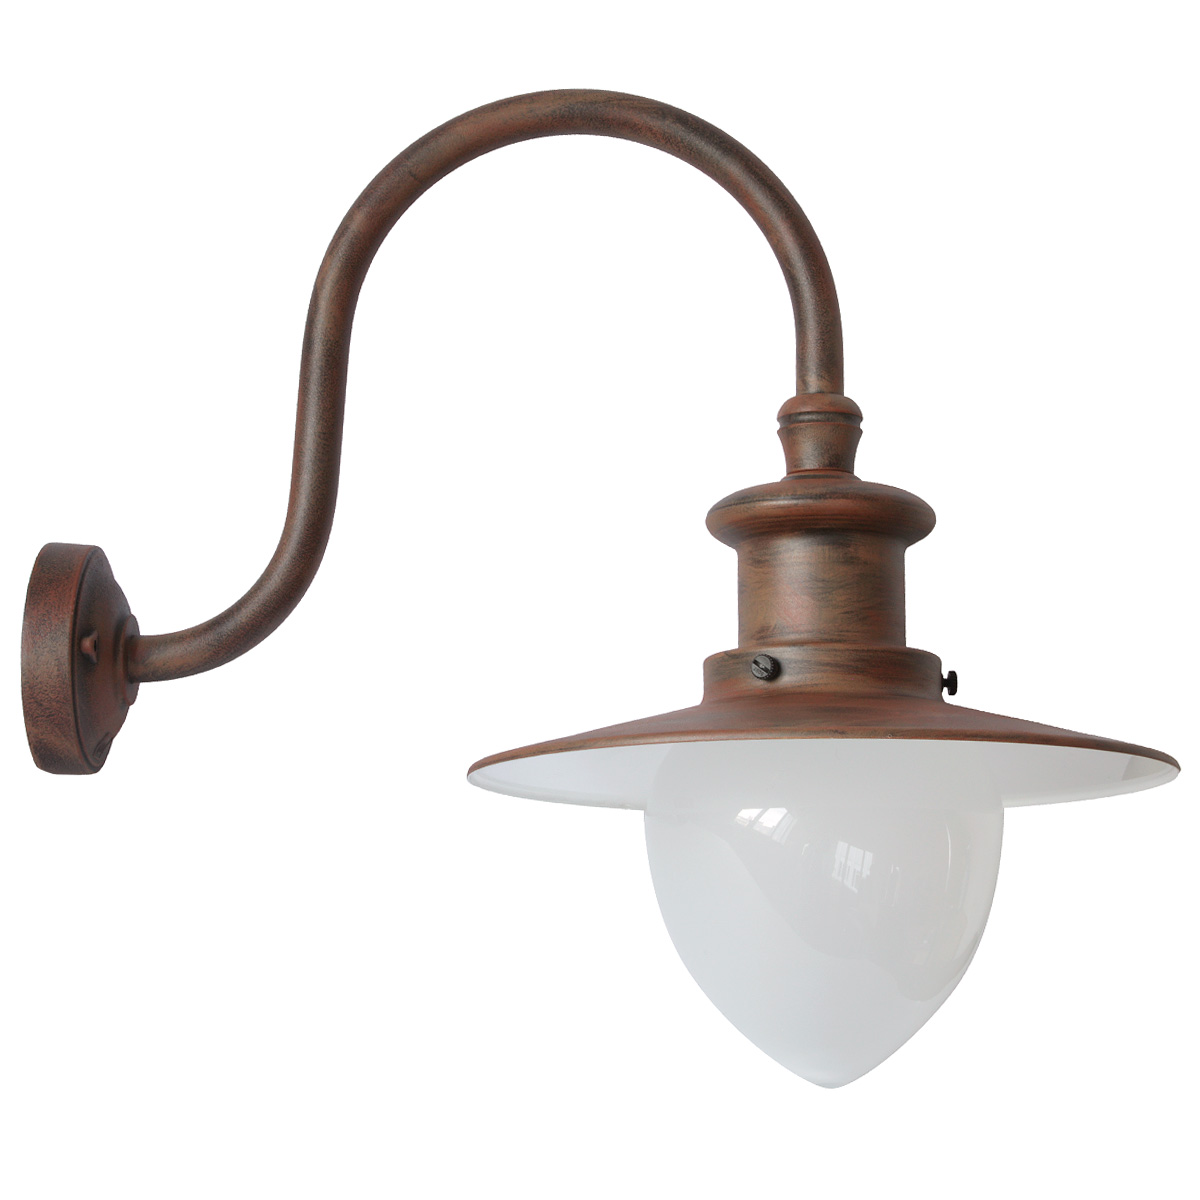 Factory-style Wall Light for Outdoors with Satin-finished Pointed Cylinder Glass